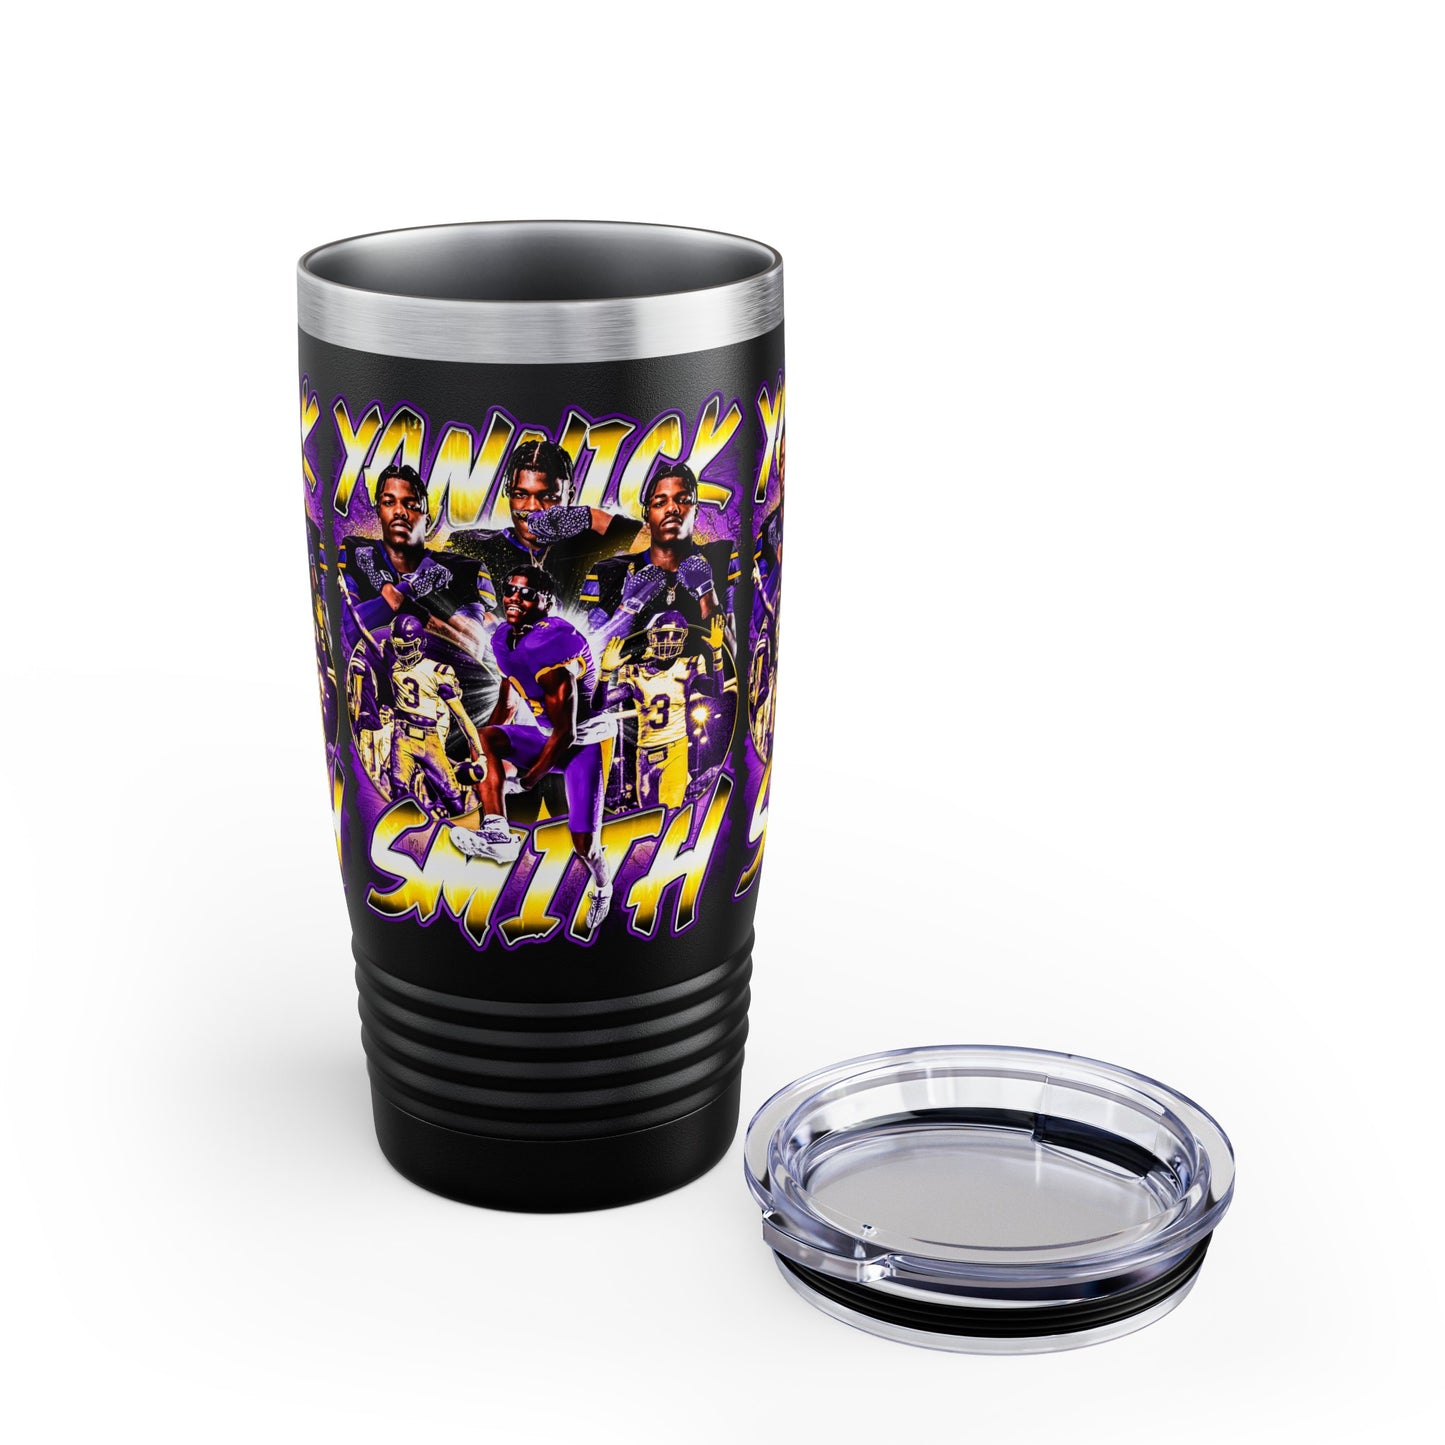 YANNICK SMITH STAINLESS STEEL TUMBLER